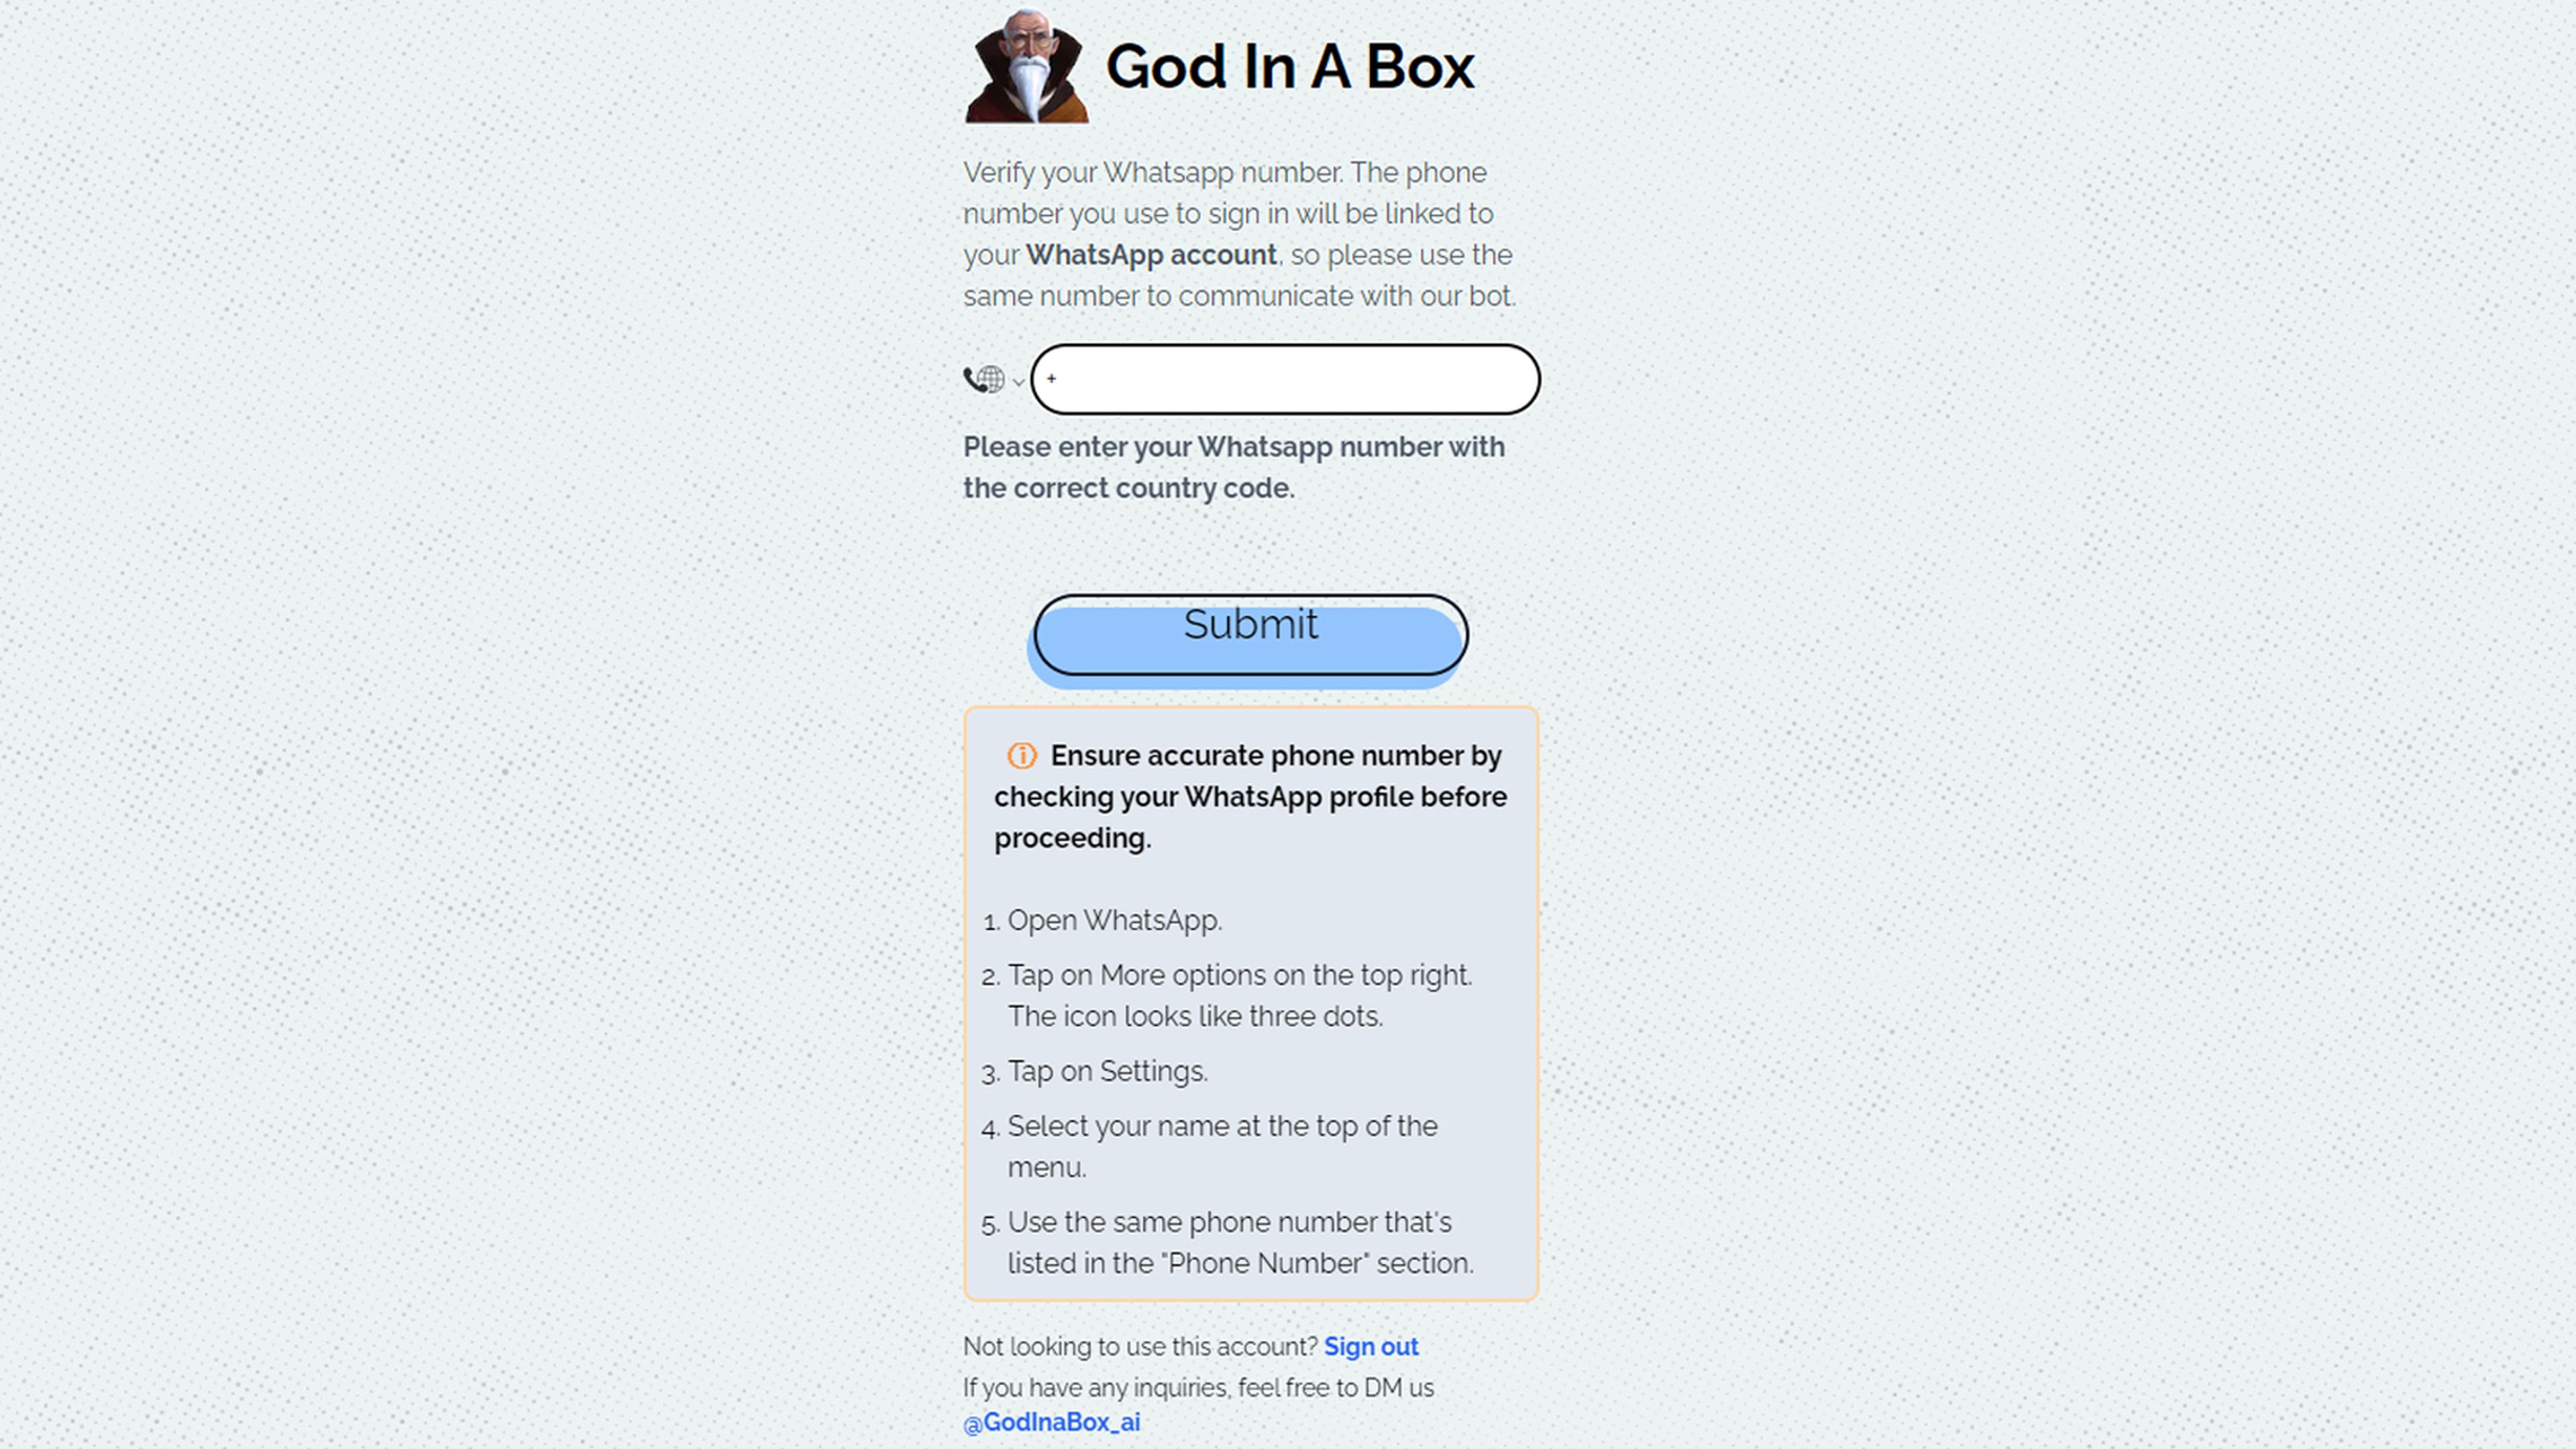 God In a Box